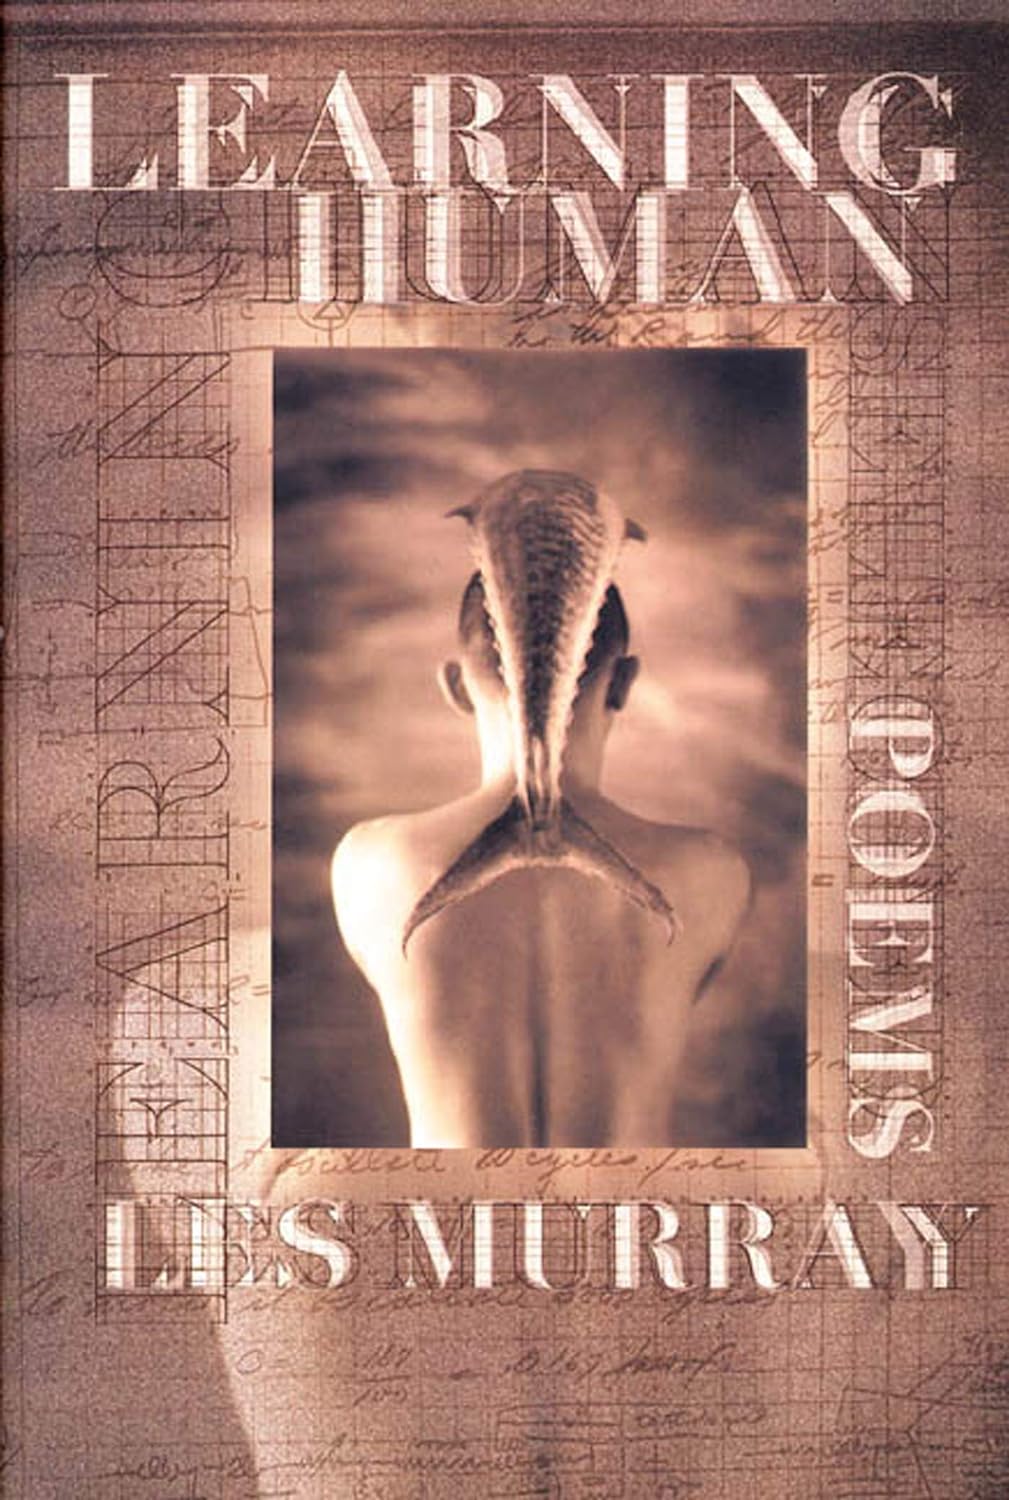 Les Murray: Learning Human (2001, Farrar, Straus and Giroux)